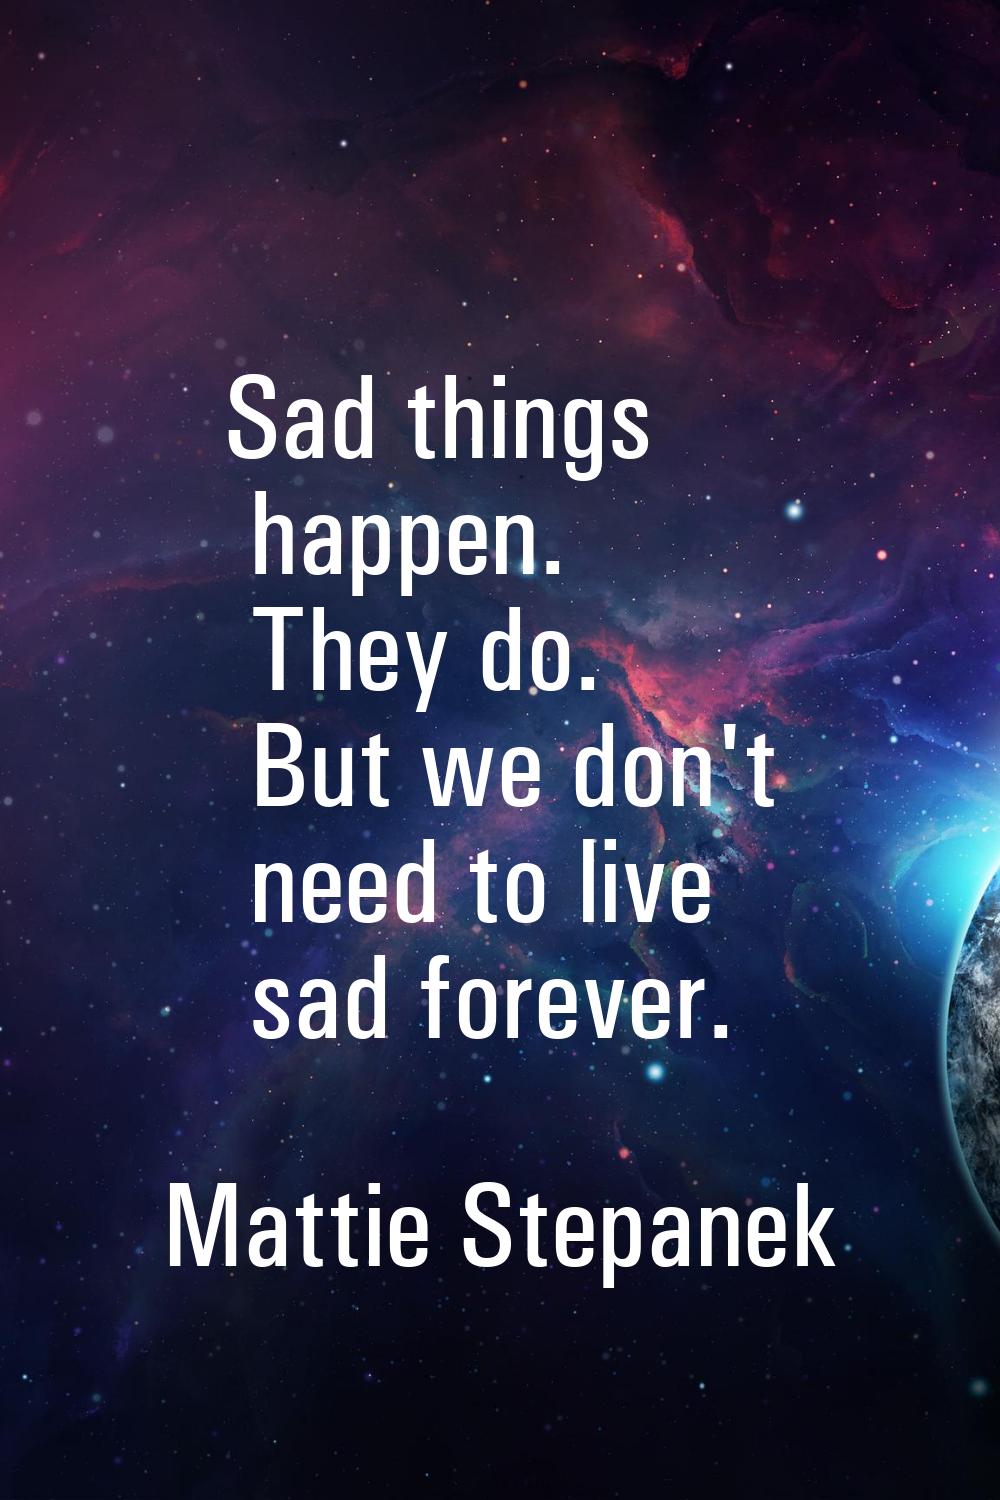 Sad things happen. They do. But we don't need to live sad forever.